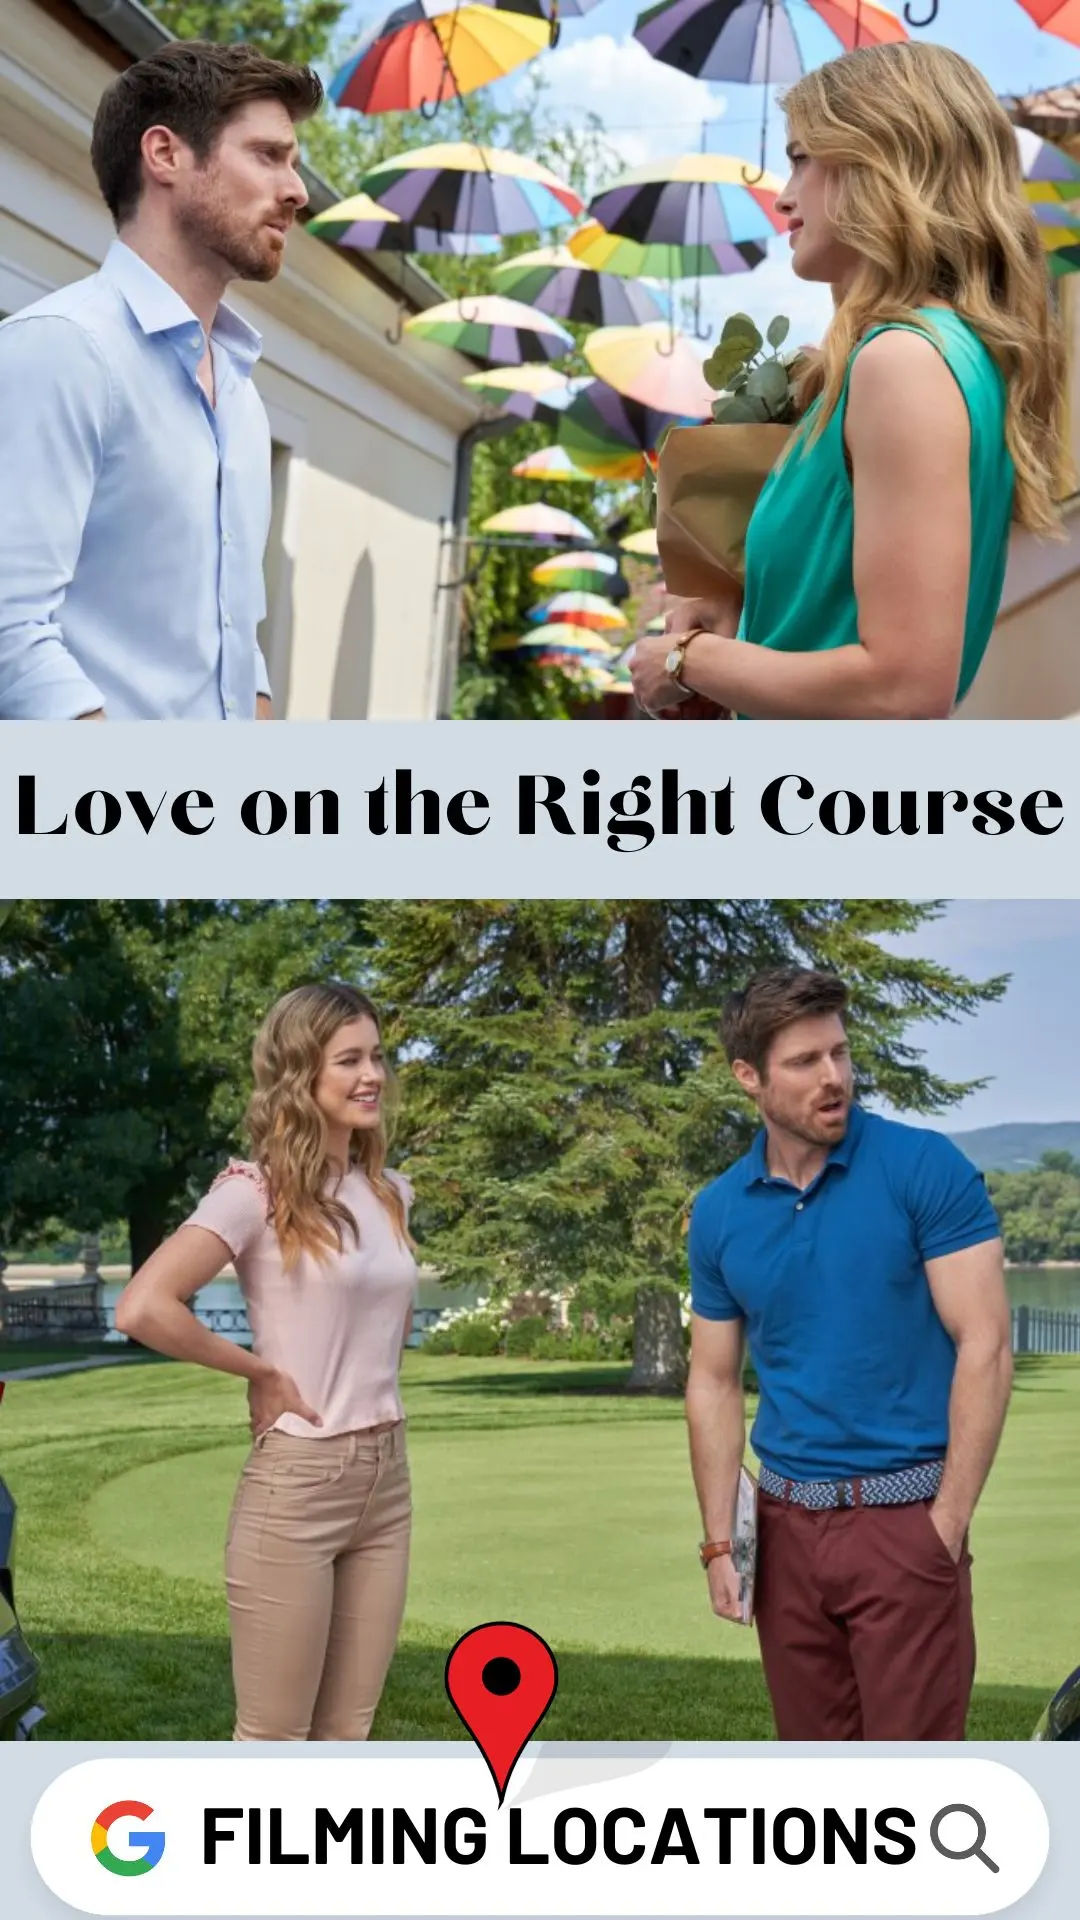 Love on the Right Course Filming Locations